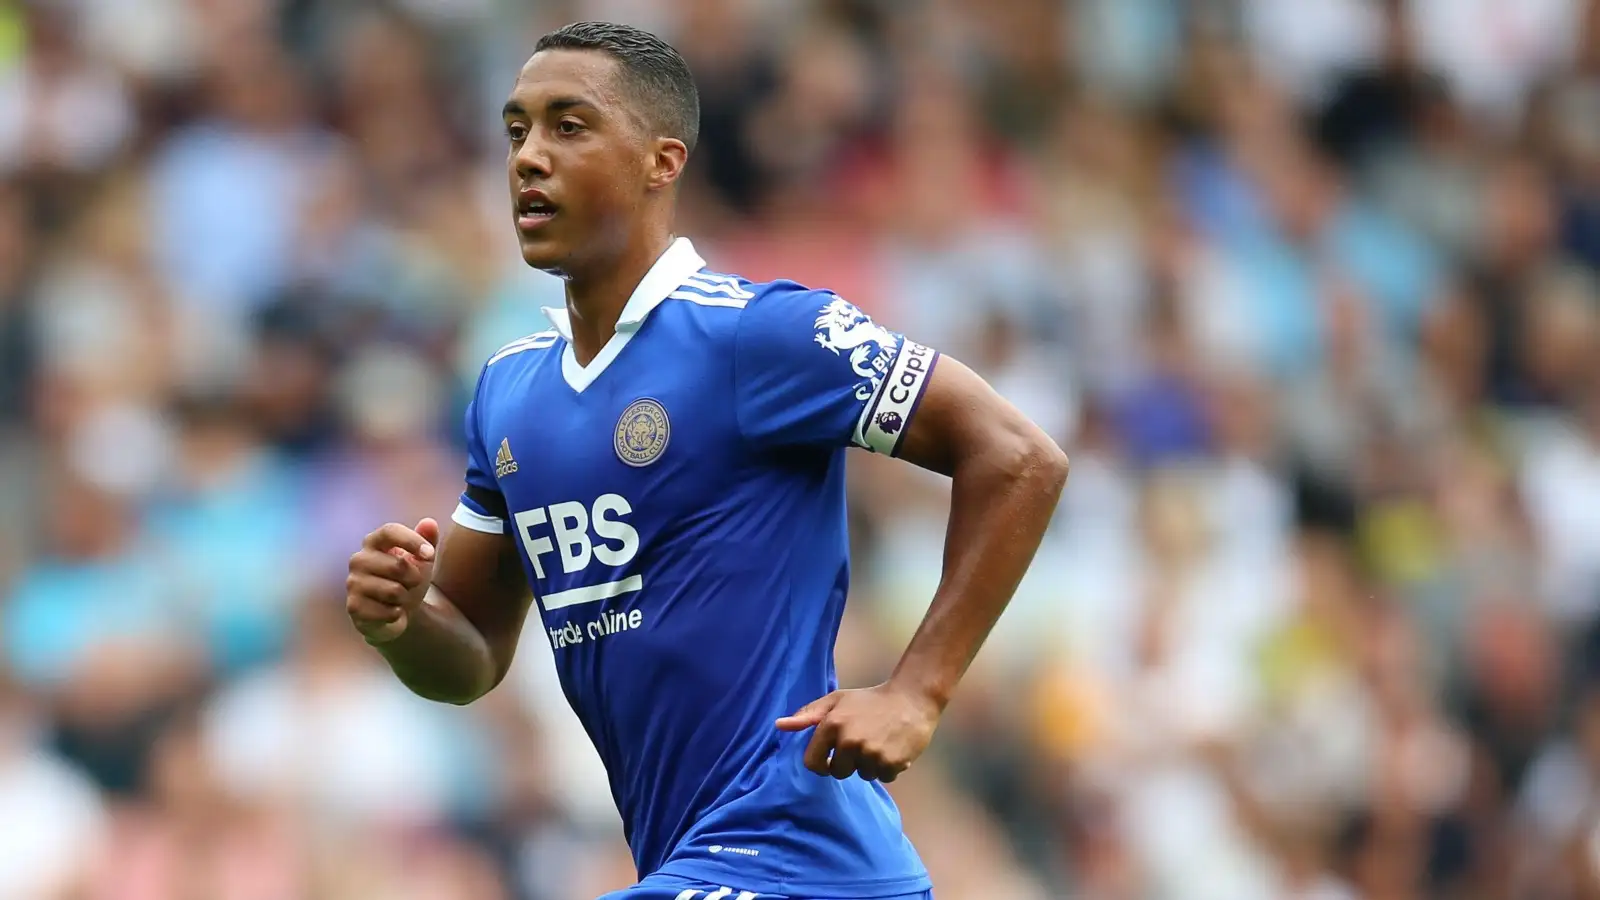 Reported Arsenal target Youri Tielemans during a match